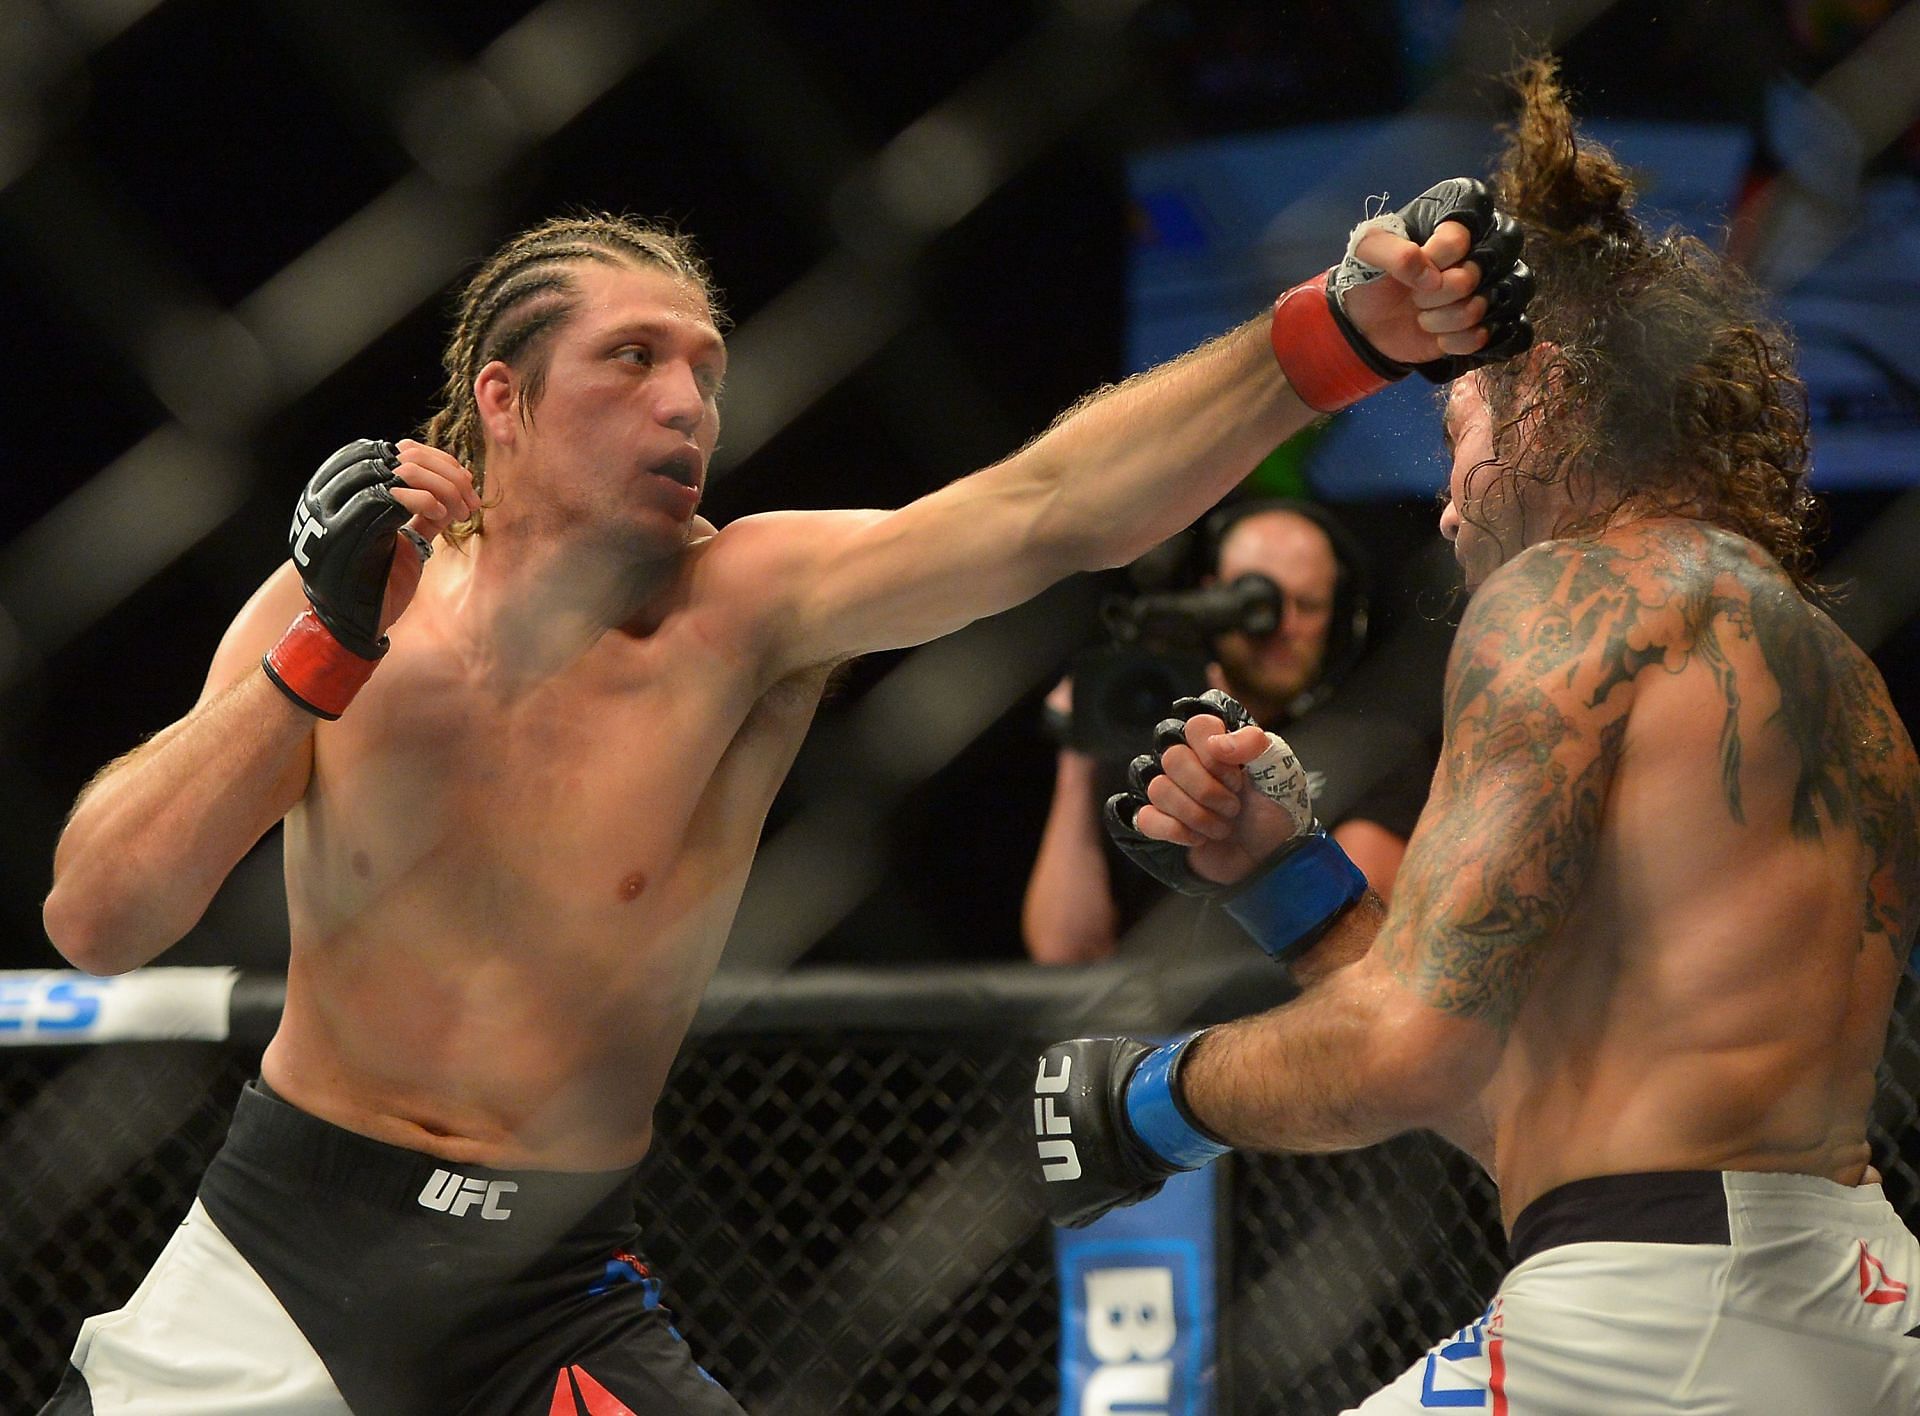 Brian Ortega has shown himself capable of both submitting and knocking out his foes